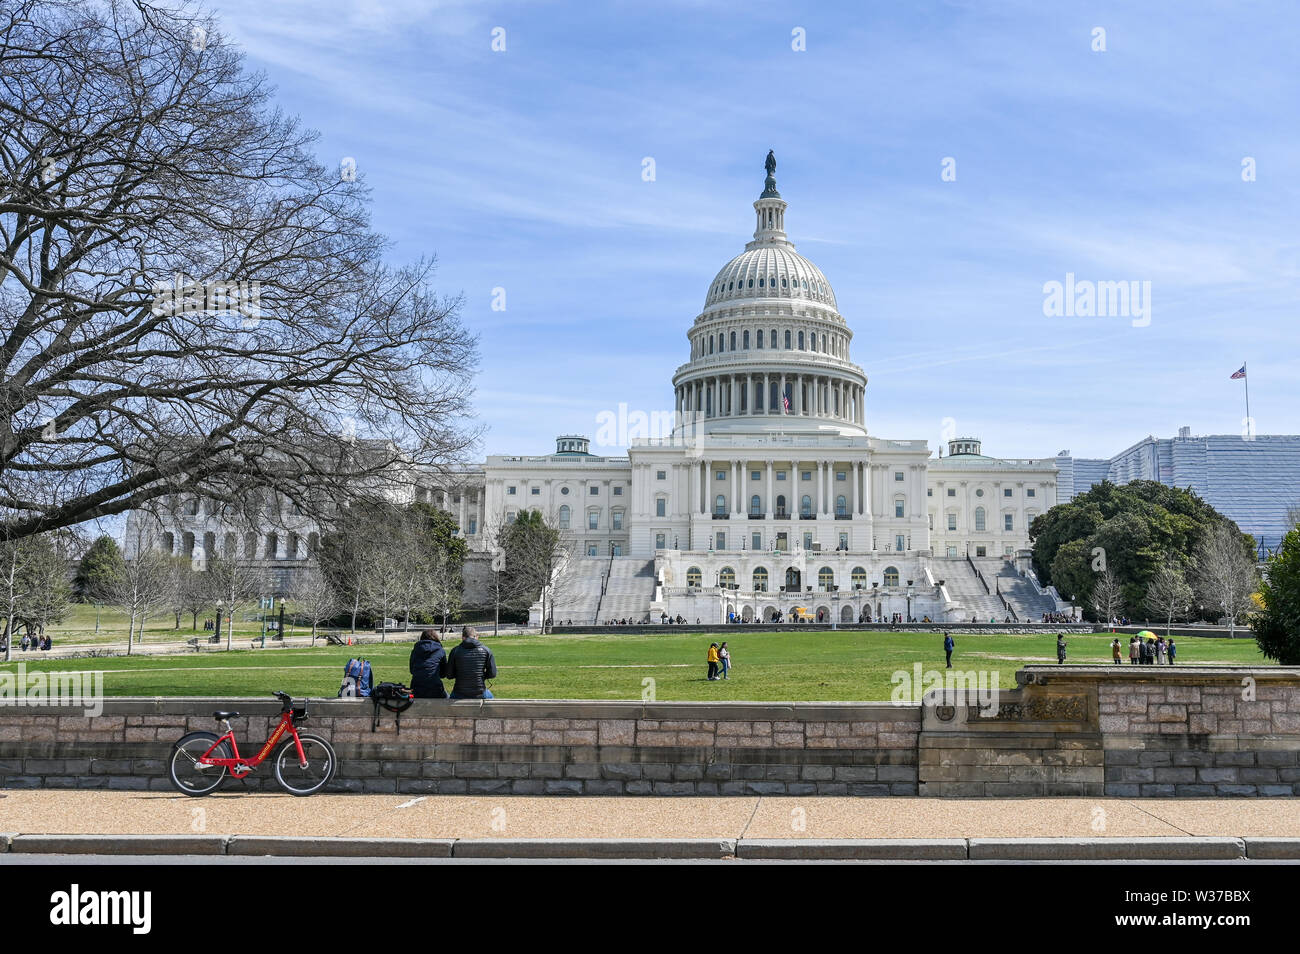 United States Capitol and Capitol Hill viewed from the National Mall. The Capitol building is the home of US Congress. Stock Photo